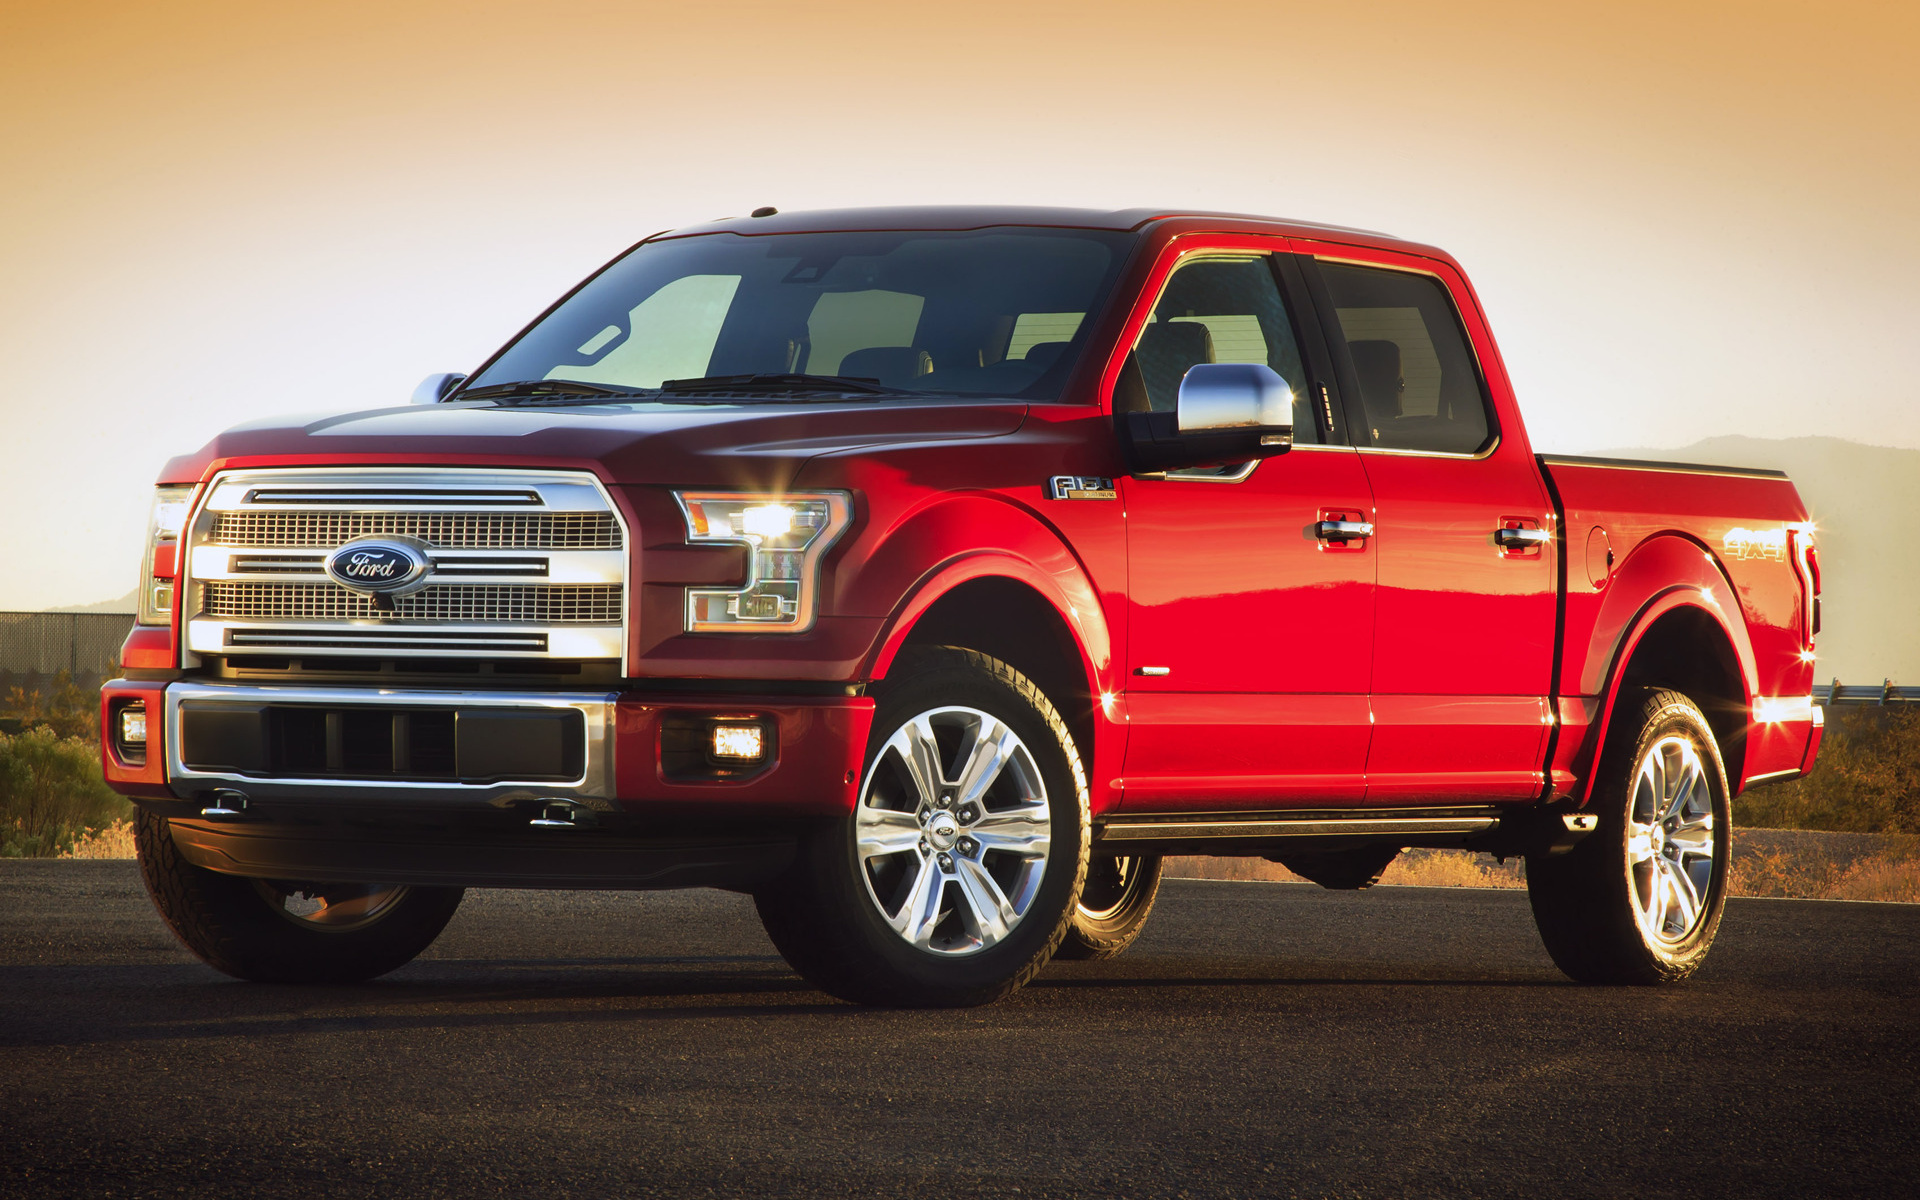 2015 Ford F-150 Platinum SuperCrew - Wallpapers and HD Images | Car Pixel 2012 Ford F 150 5.0 Towing Capacity